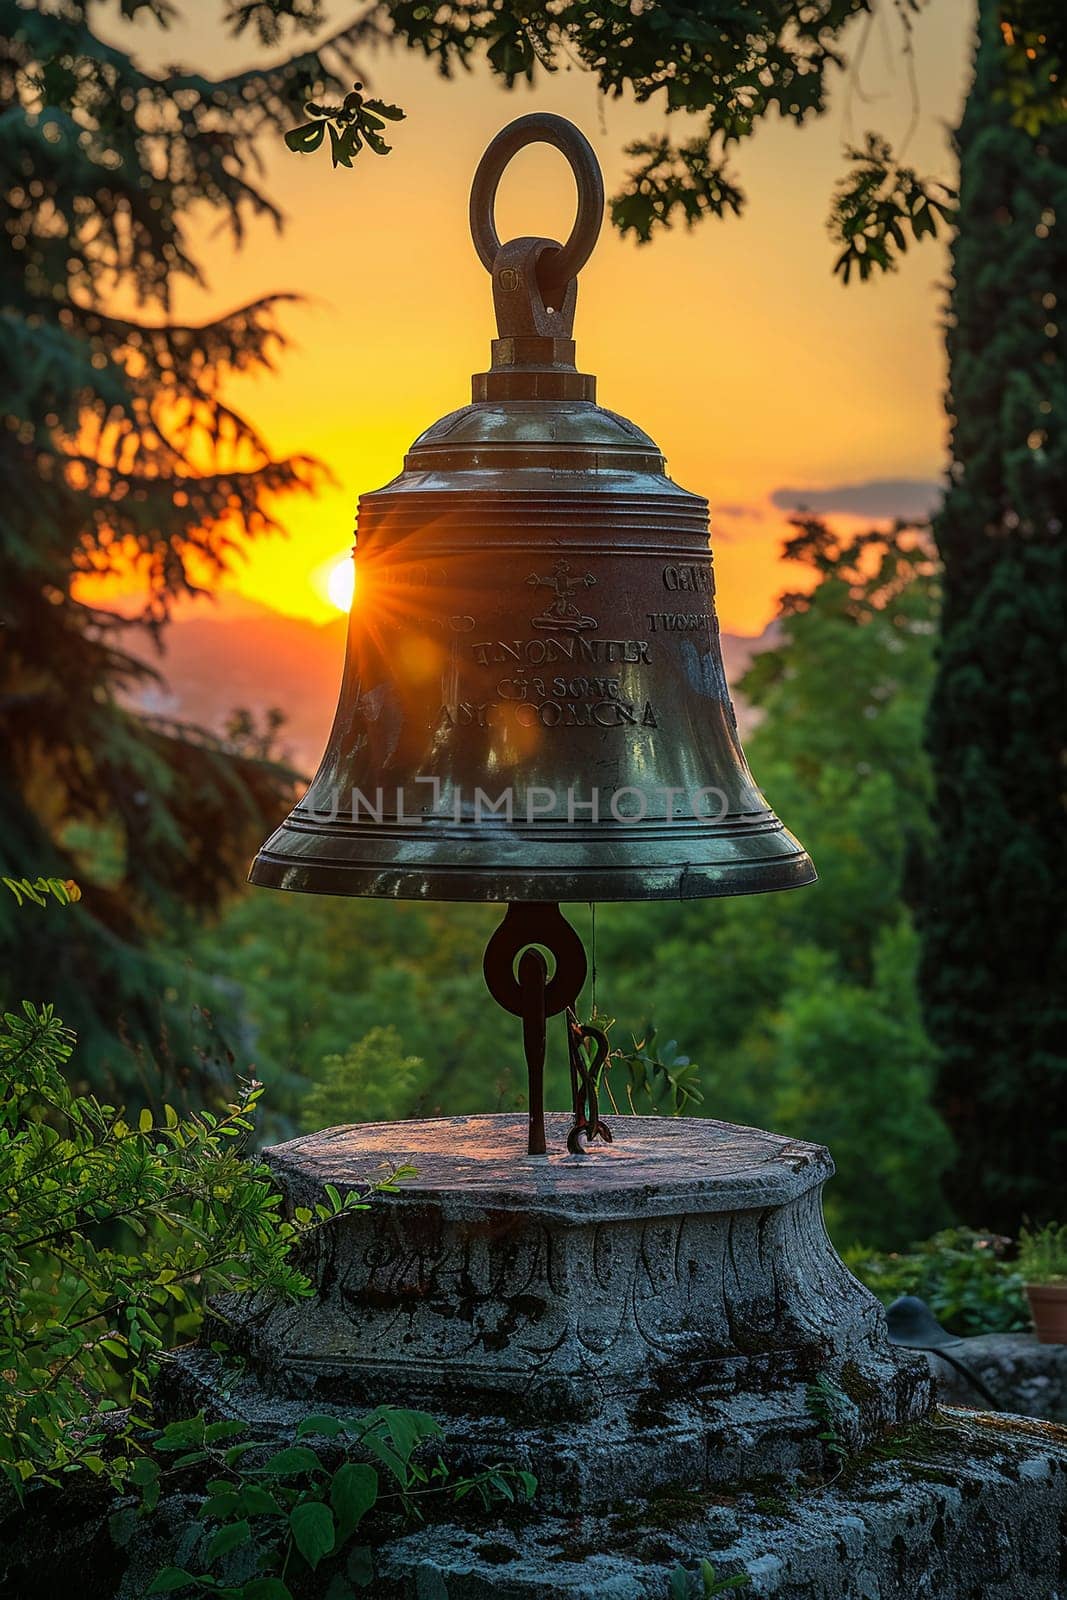 Brass Church Bell Silhouetted Against the Sunset The bell merges with the dusk by Benzoix